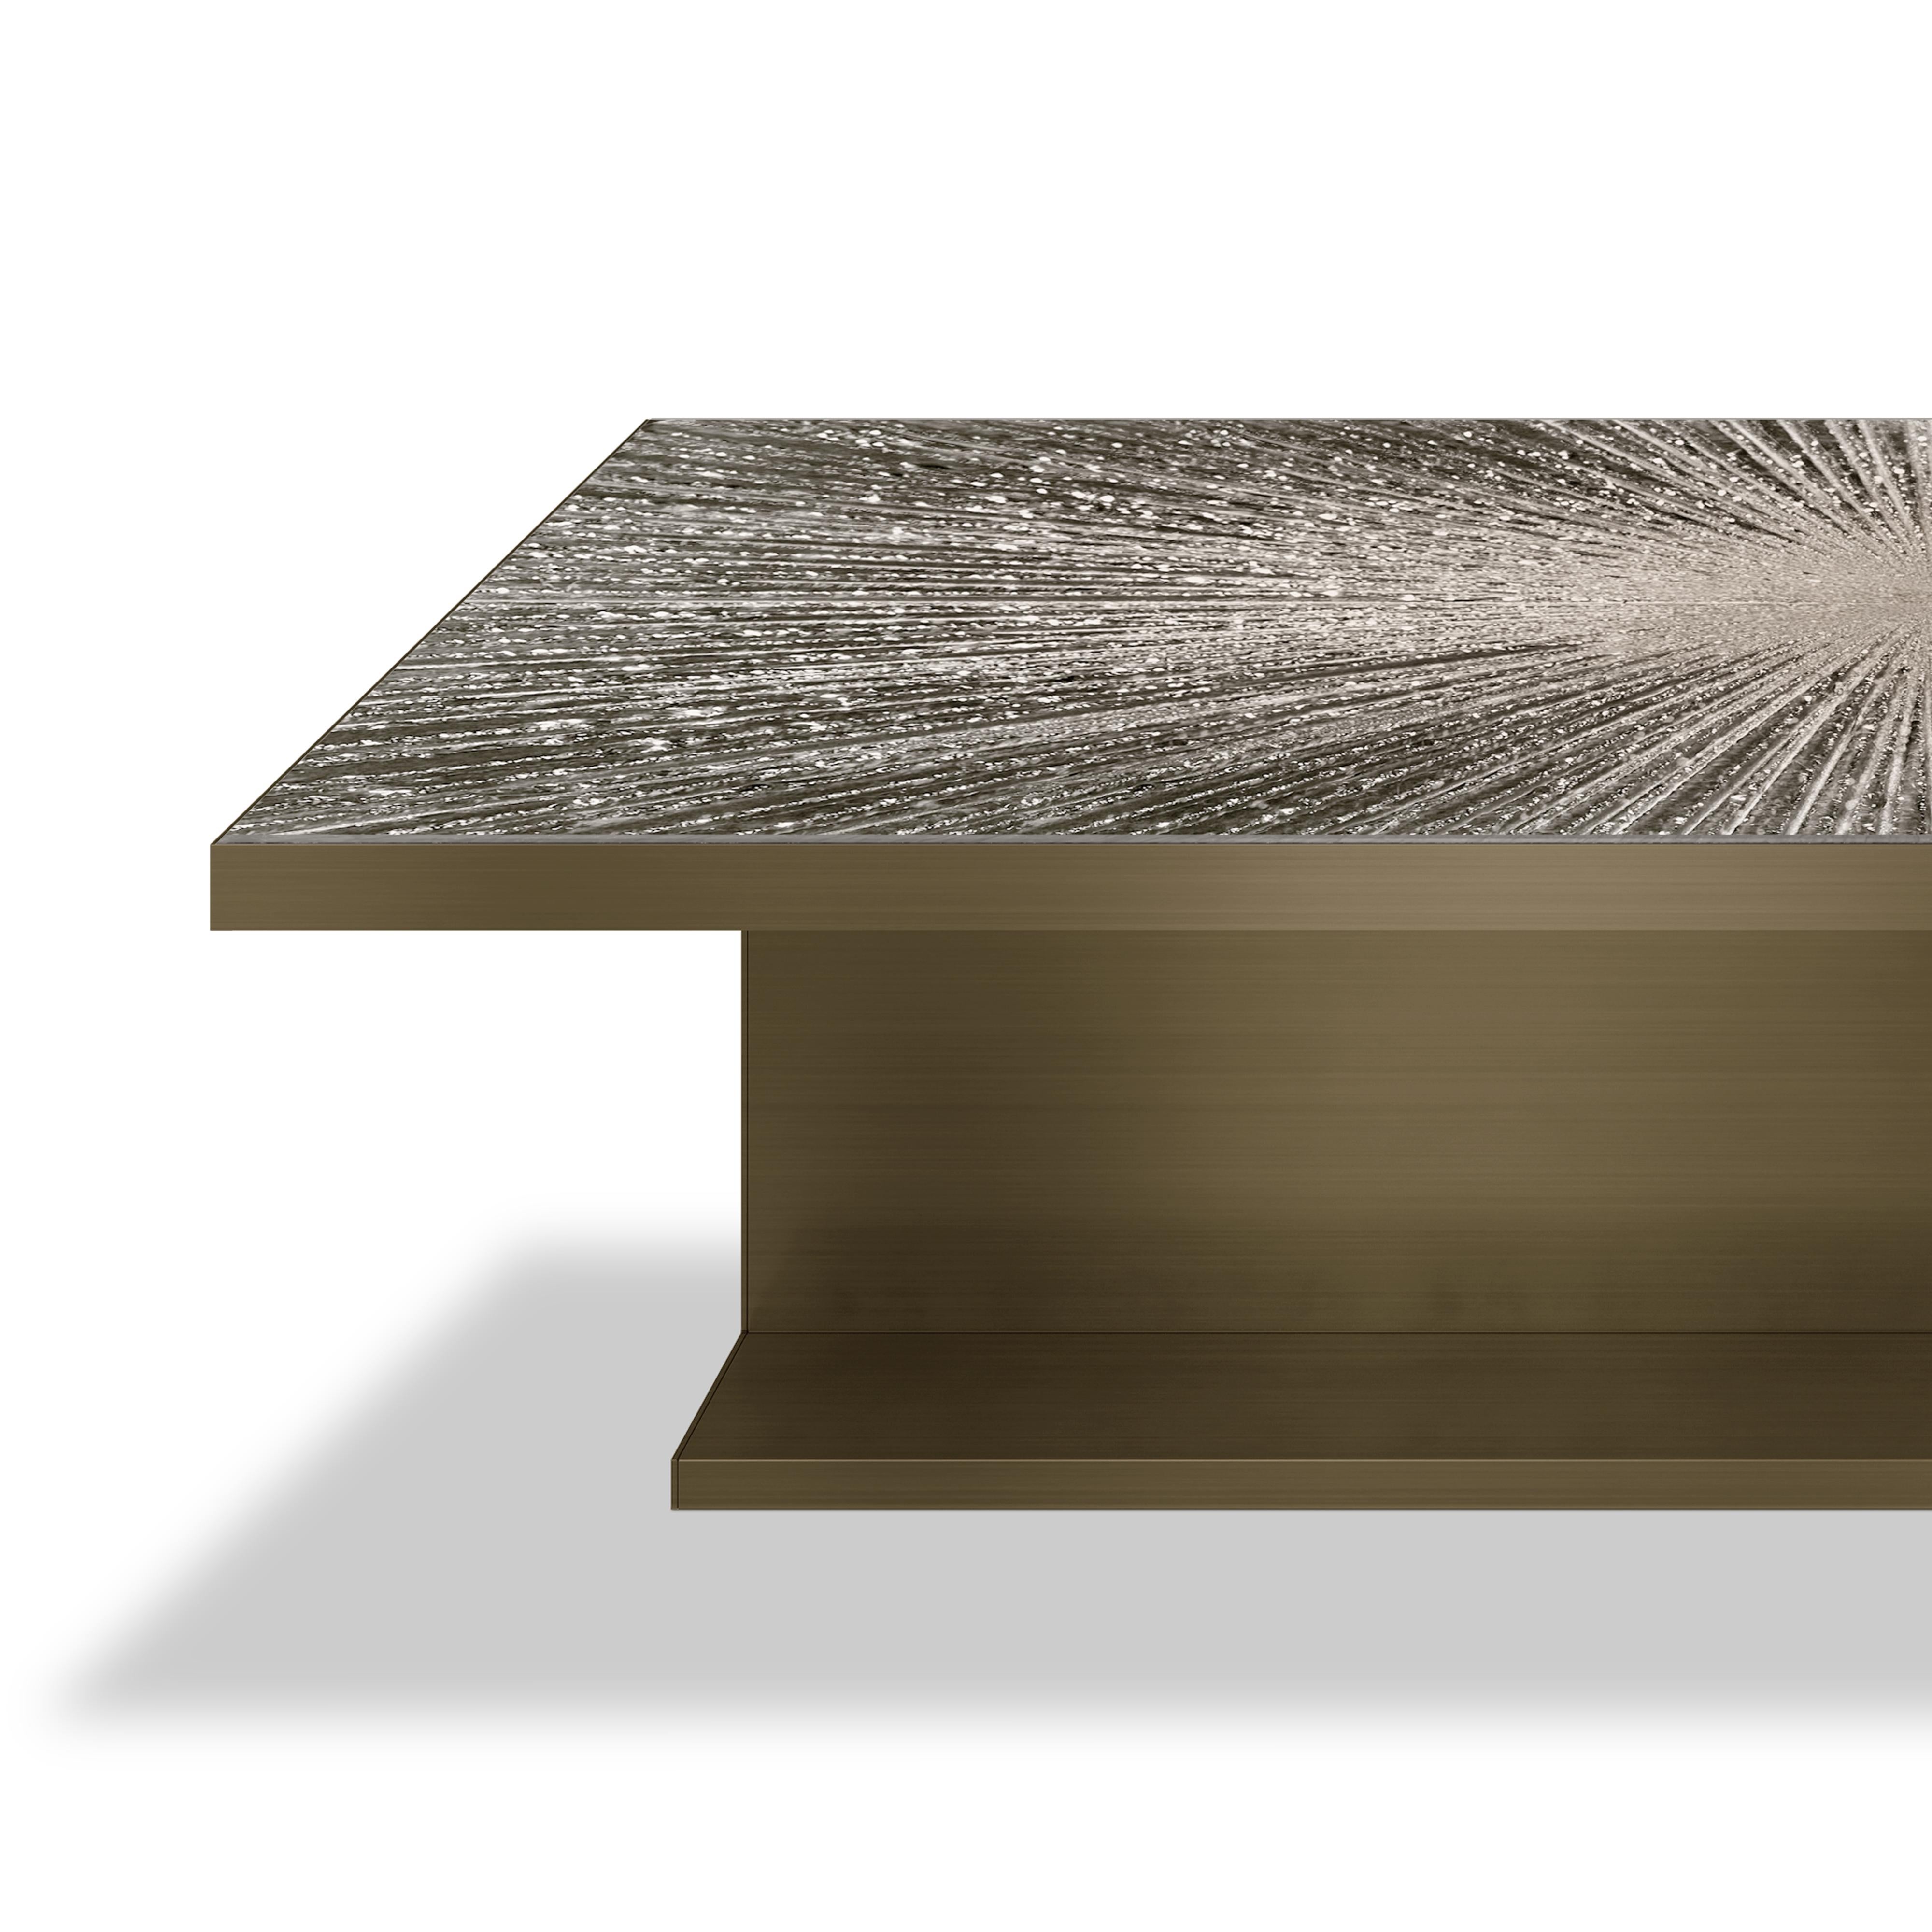 Lillian Gorbachincky's signature limited edition GALA bronze dining table with starburst art glass top and bronze base designed and fabricated by Lillian Gorbachicnky Atelier.

Overall Dimensions: 96